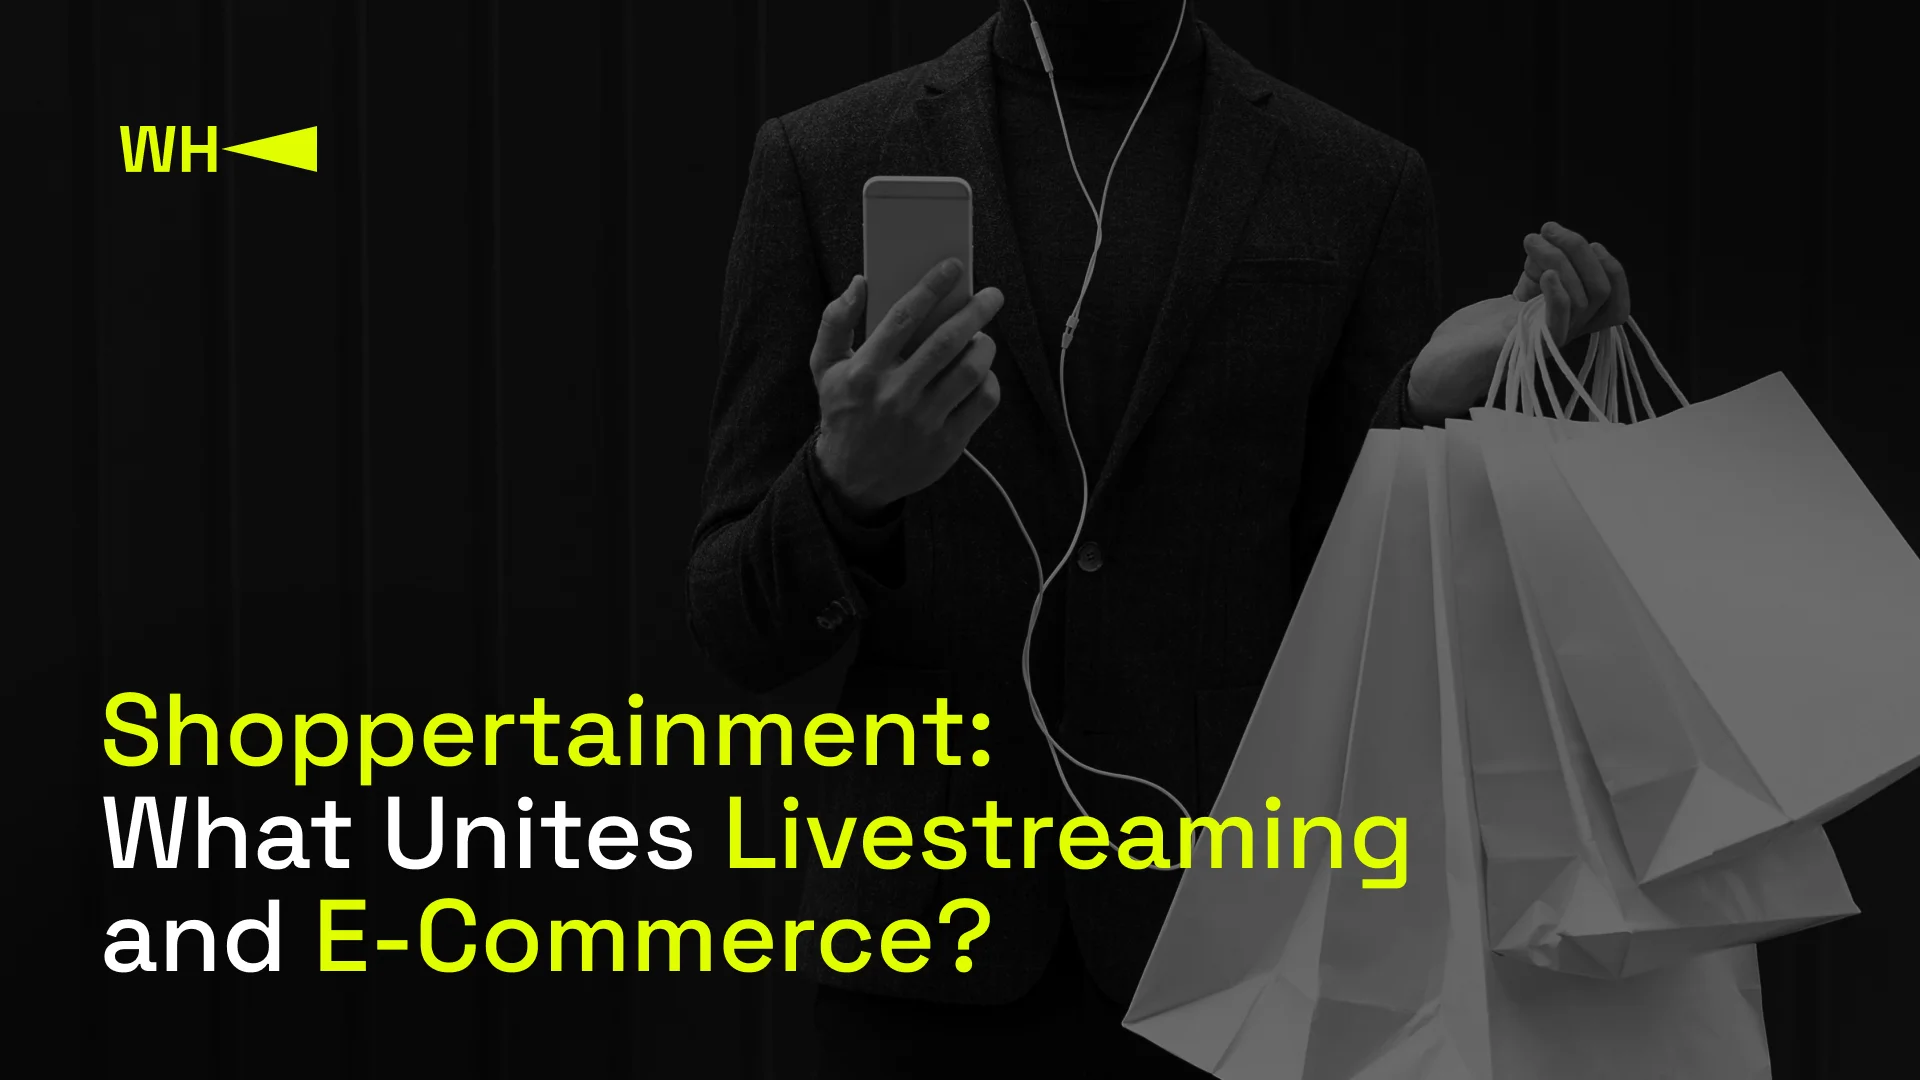 Shoppertainment: What Unites Livestreaming and E-Commerce?